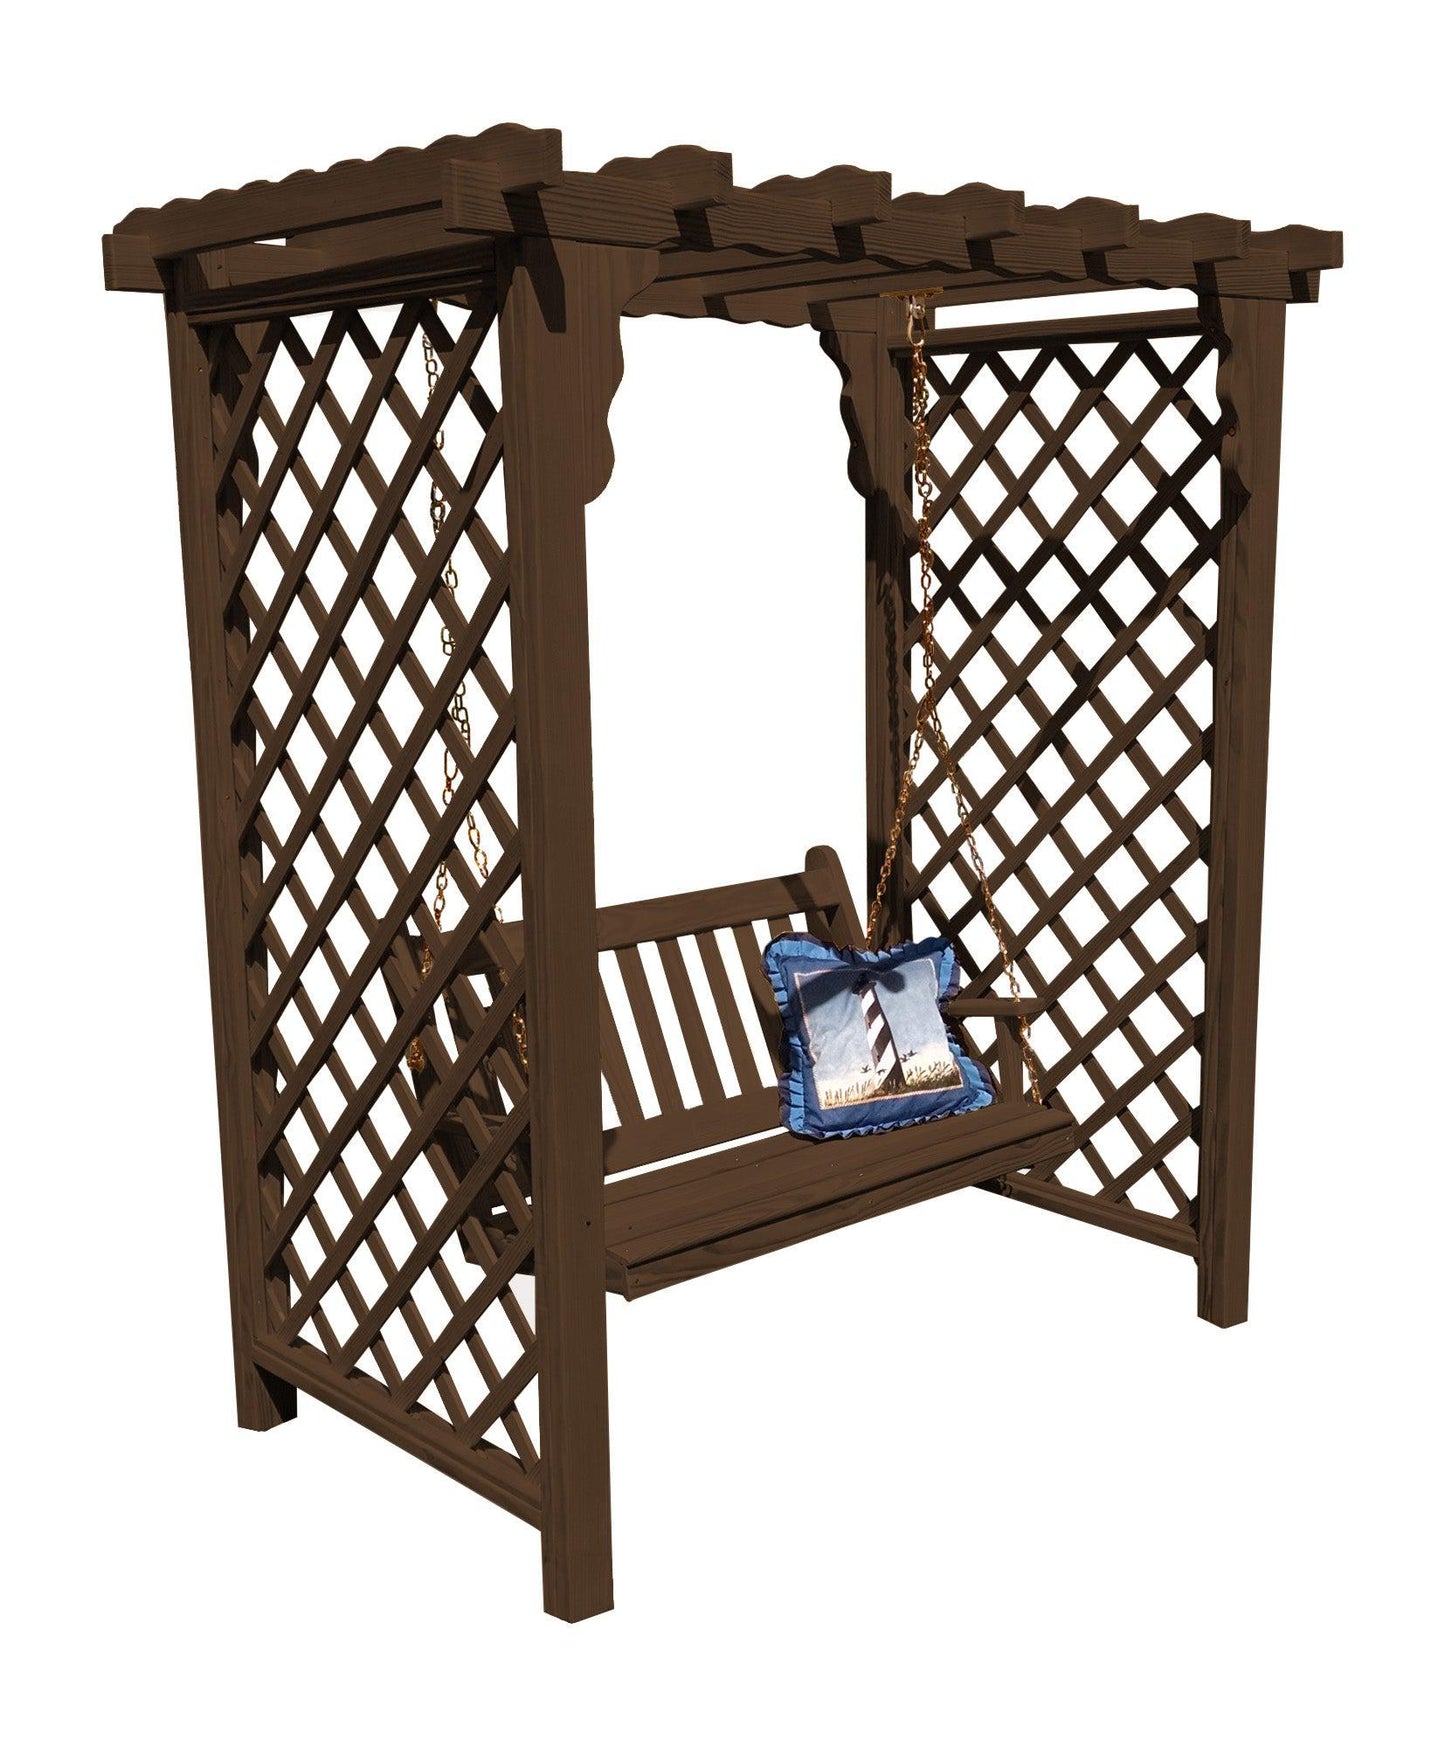 A&L FURNITURE CO. 5' Covington Pressure Treated Pine Arbor & Swing - LEAD TIME TO SHIP 10 BUSINESS DAYS